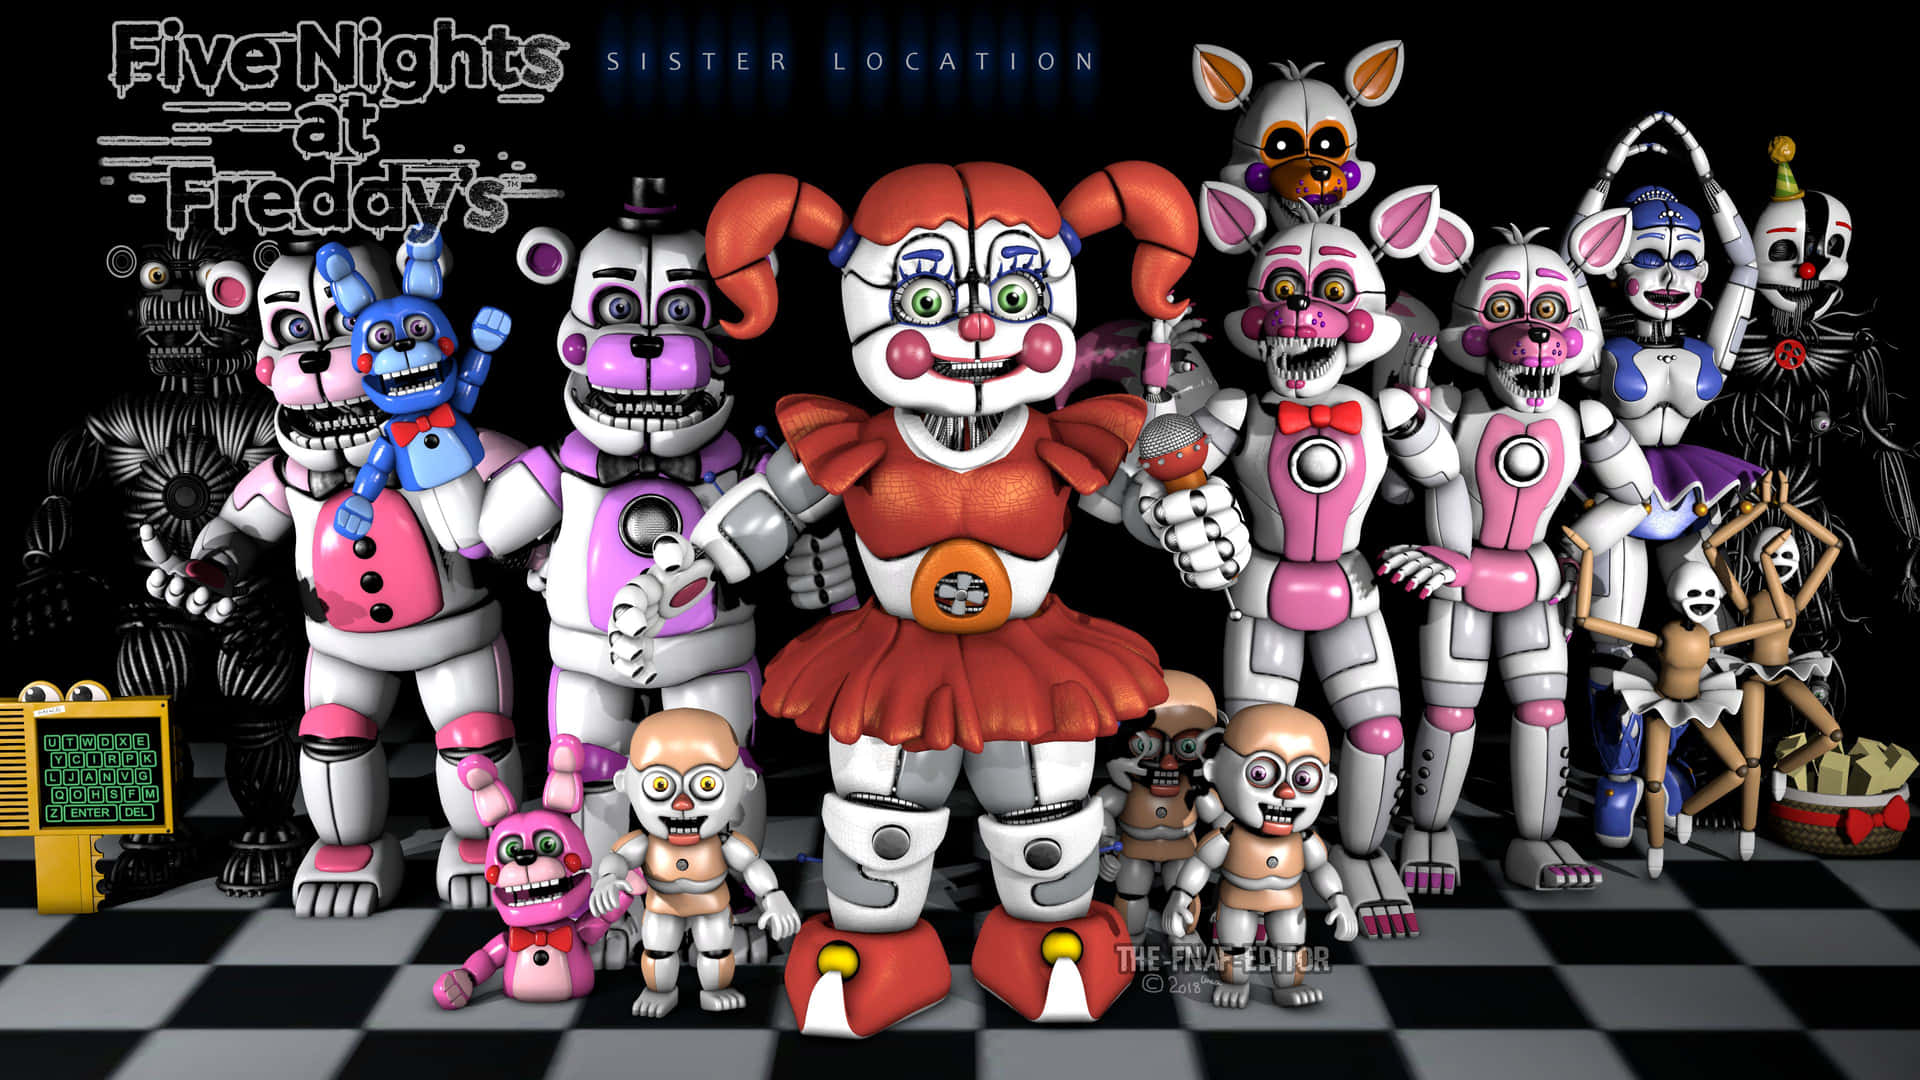 "Experience the Horror of Five Nights at Freddy's Sister Location" Wallpaper